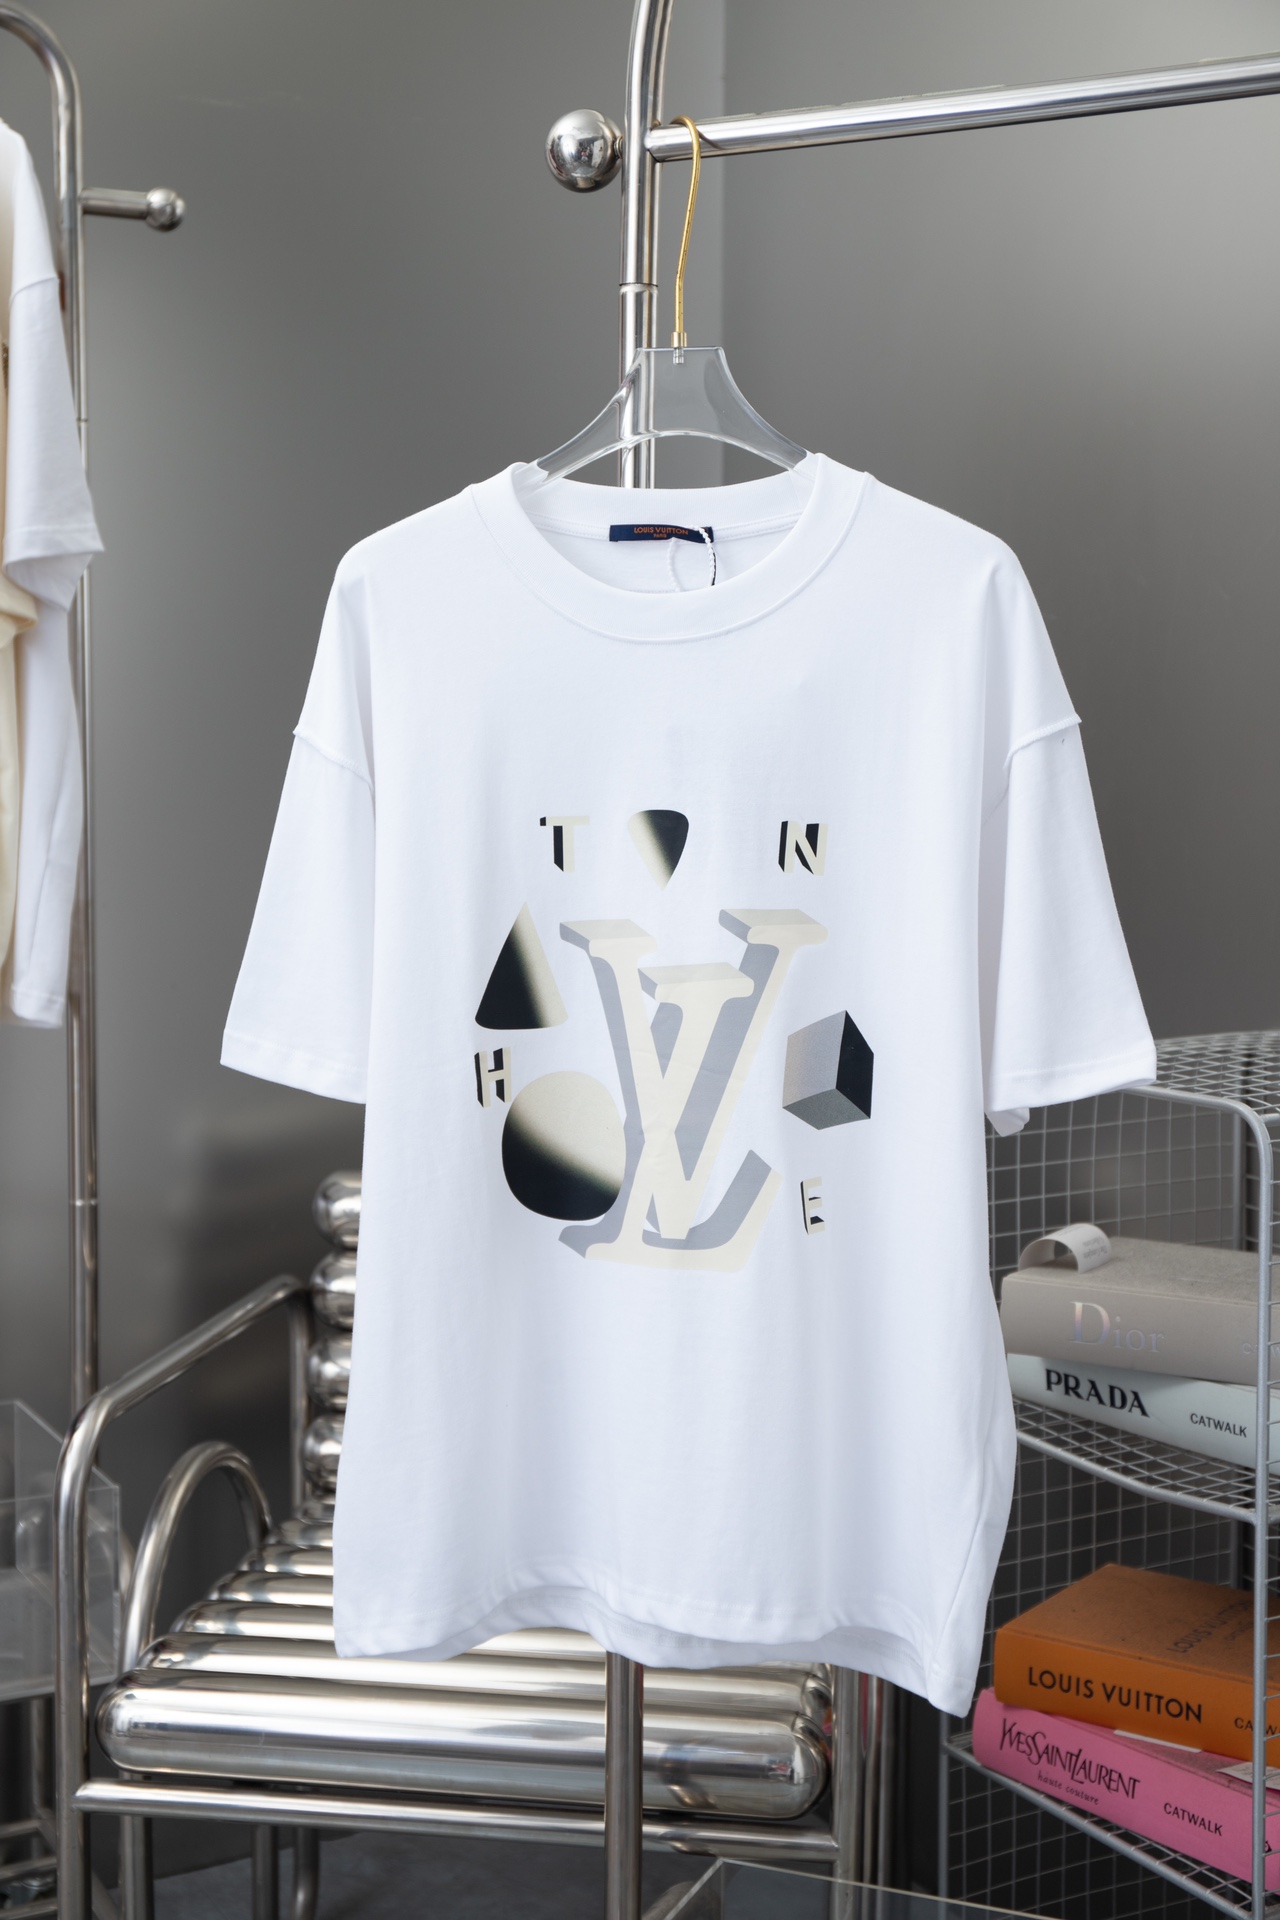 Louis Vuitton Clothing T-Shirt Highest Product Quality
 Unisex Cotton Spring Collection Fashion Short Sleeve